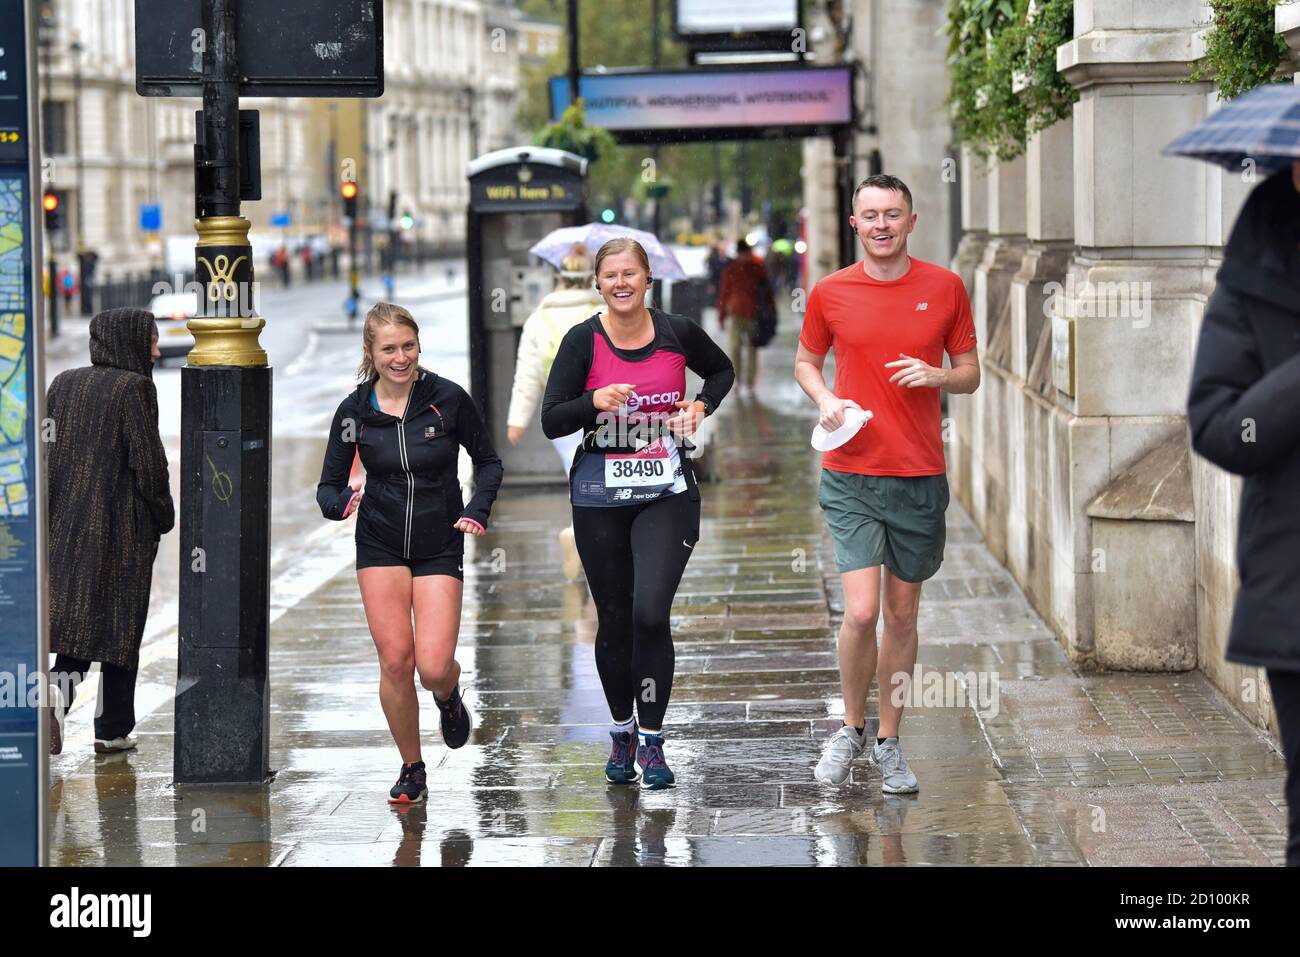 London, UK. 04th Oct, 2020. Lucy Allatt 38490 seen in Whitehall, London  taking part in the Virgin Money Virtual London Marathon running for the  Mencap Charity. Credit: SOPA Images Limited/Alamy Live News